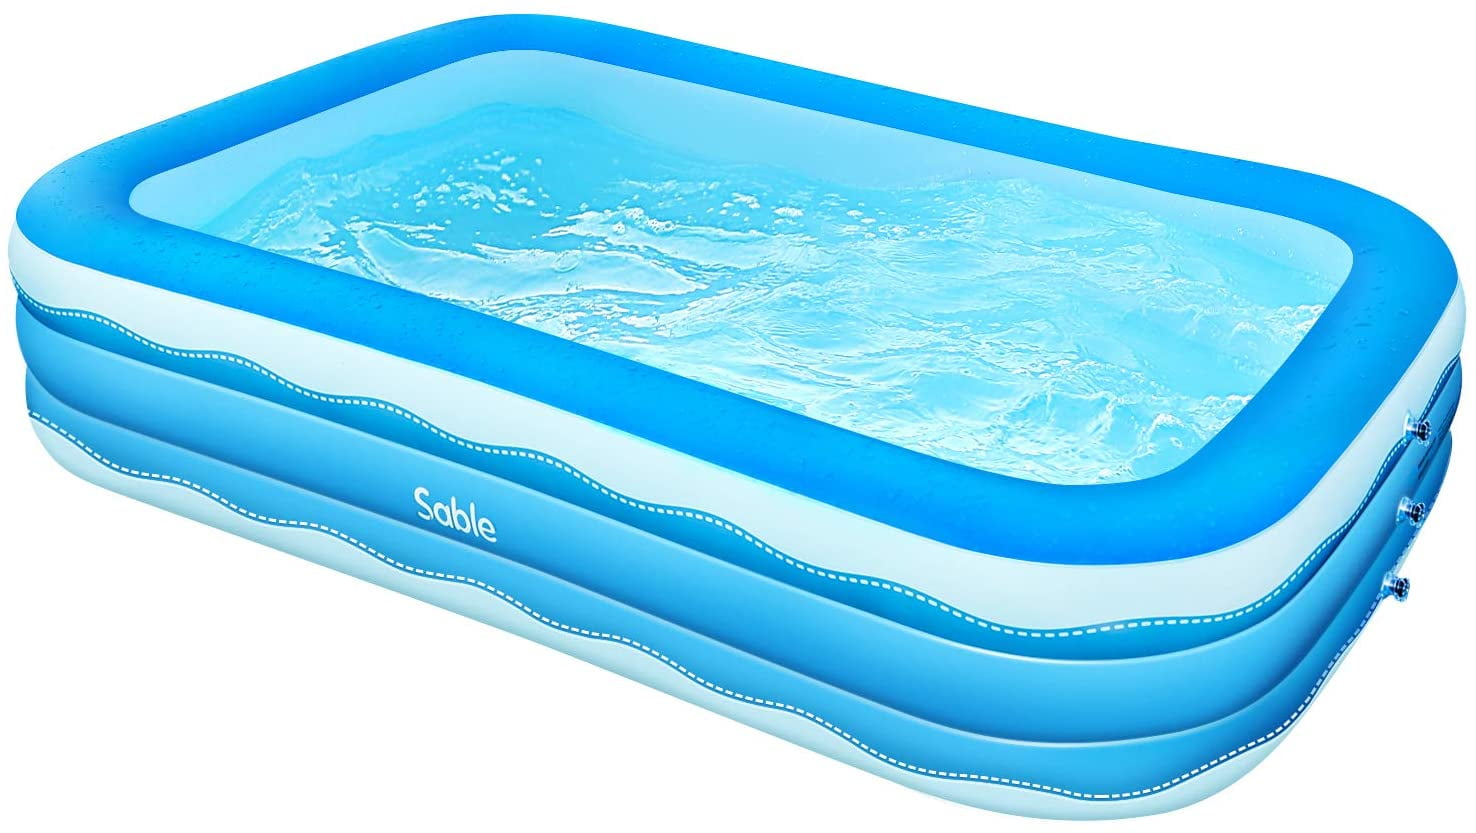 Family 119 x 70.5 x 20in Rectangular Swimming Pool for Toddlers Outdoor U-Kiss Inflatable Pool Kids Above Ground Backyard 